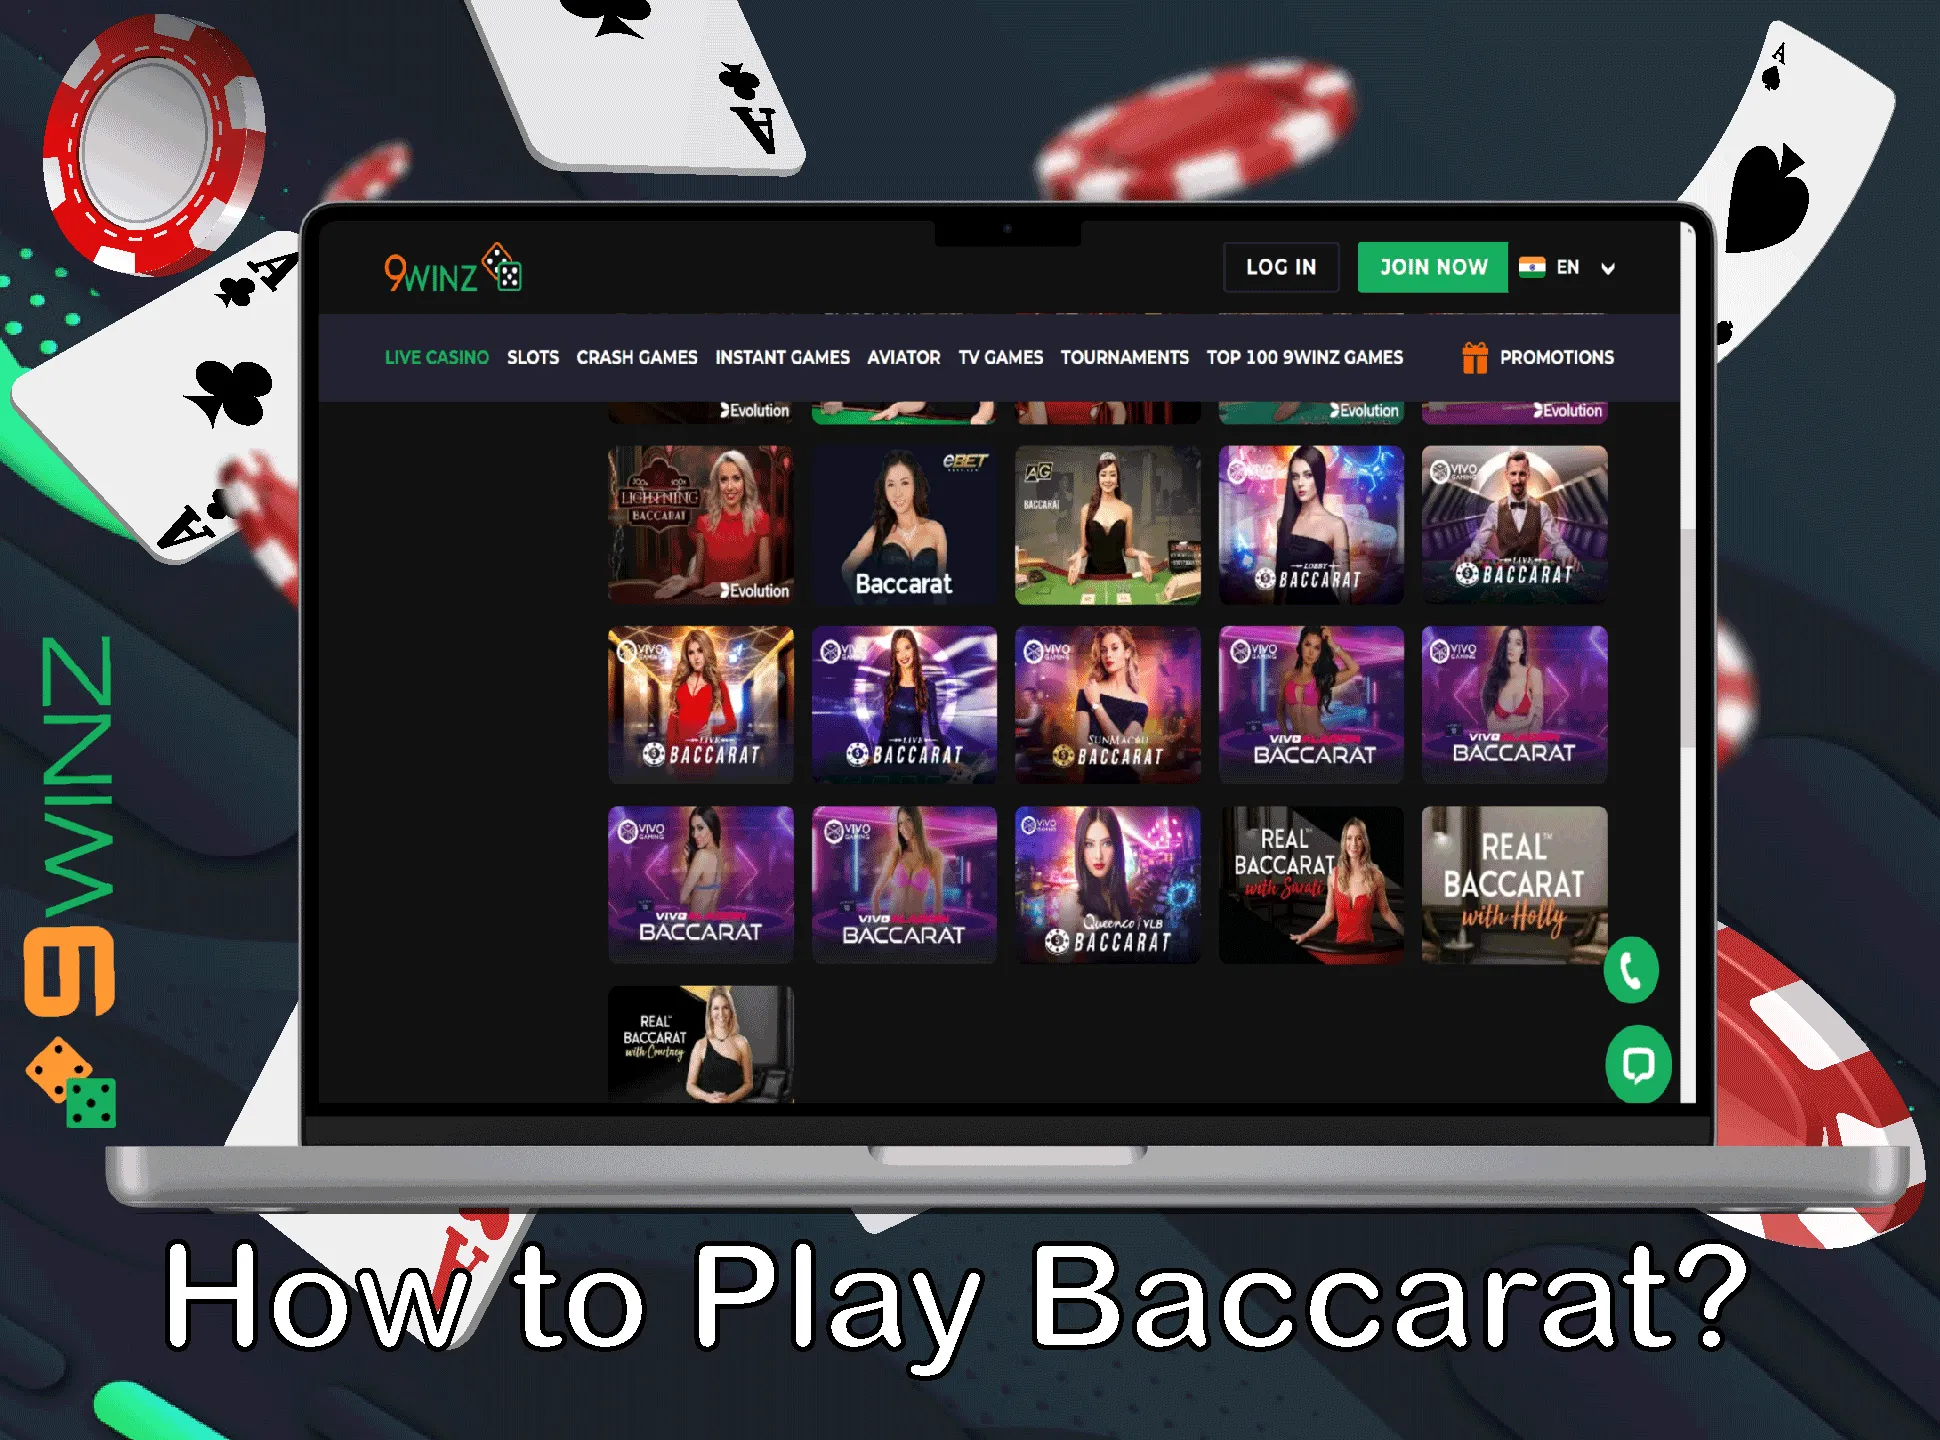 Learn how to play baccarat on the special 9winz page.